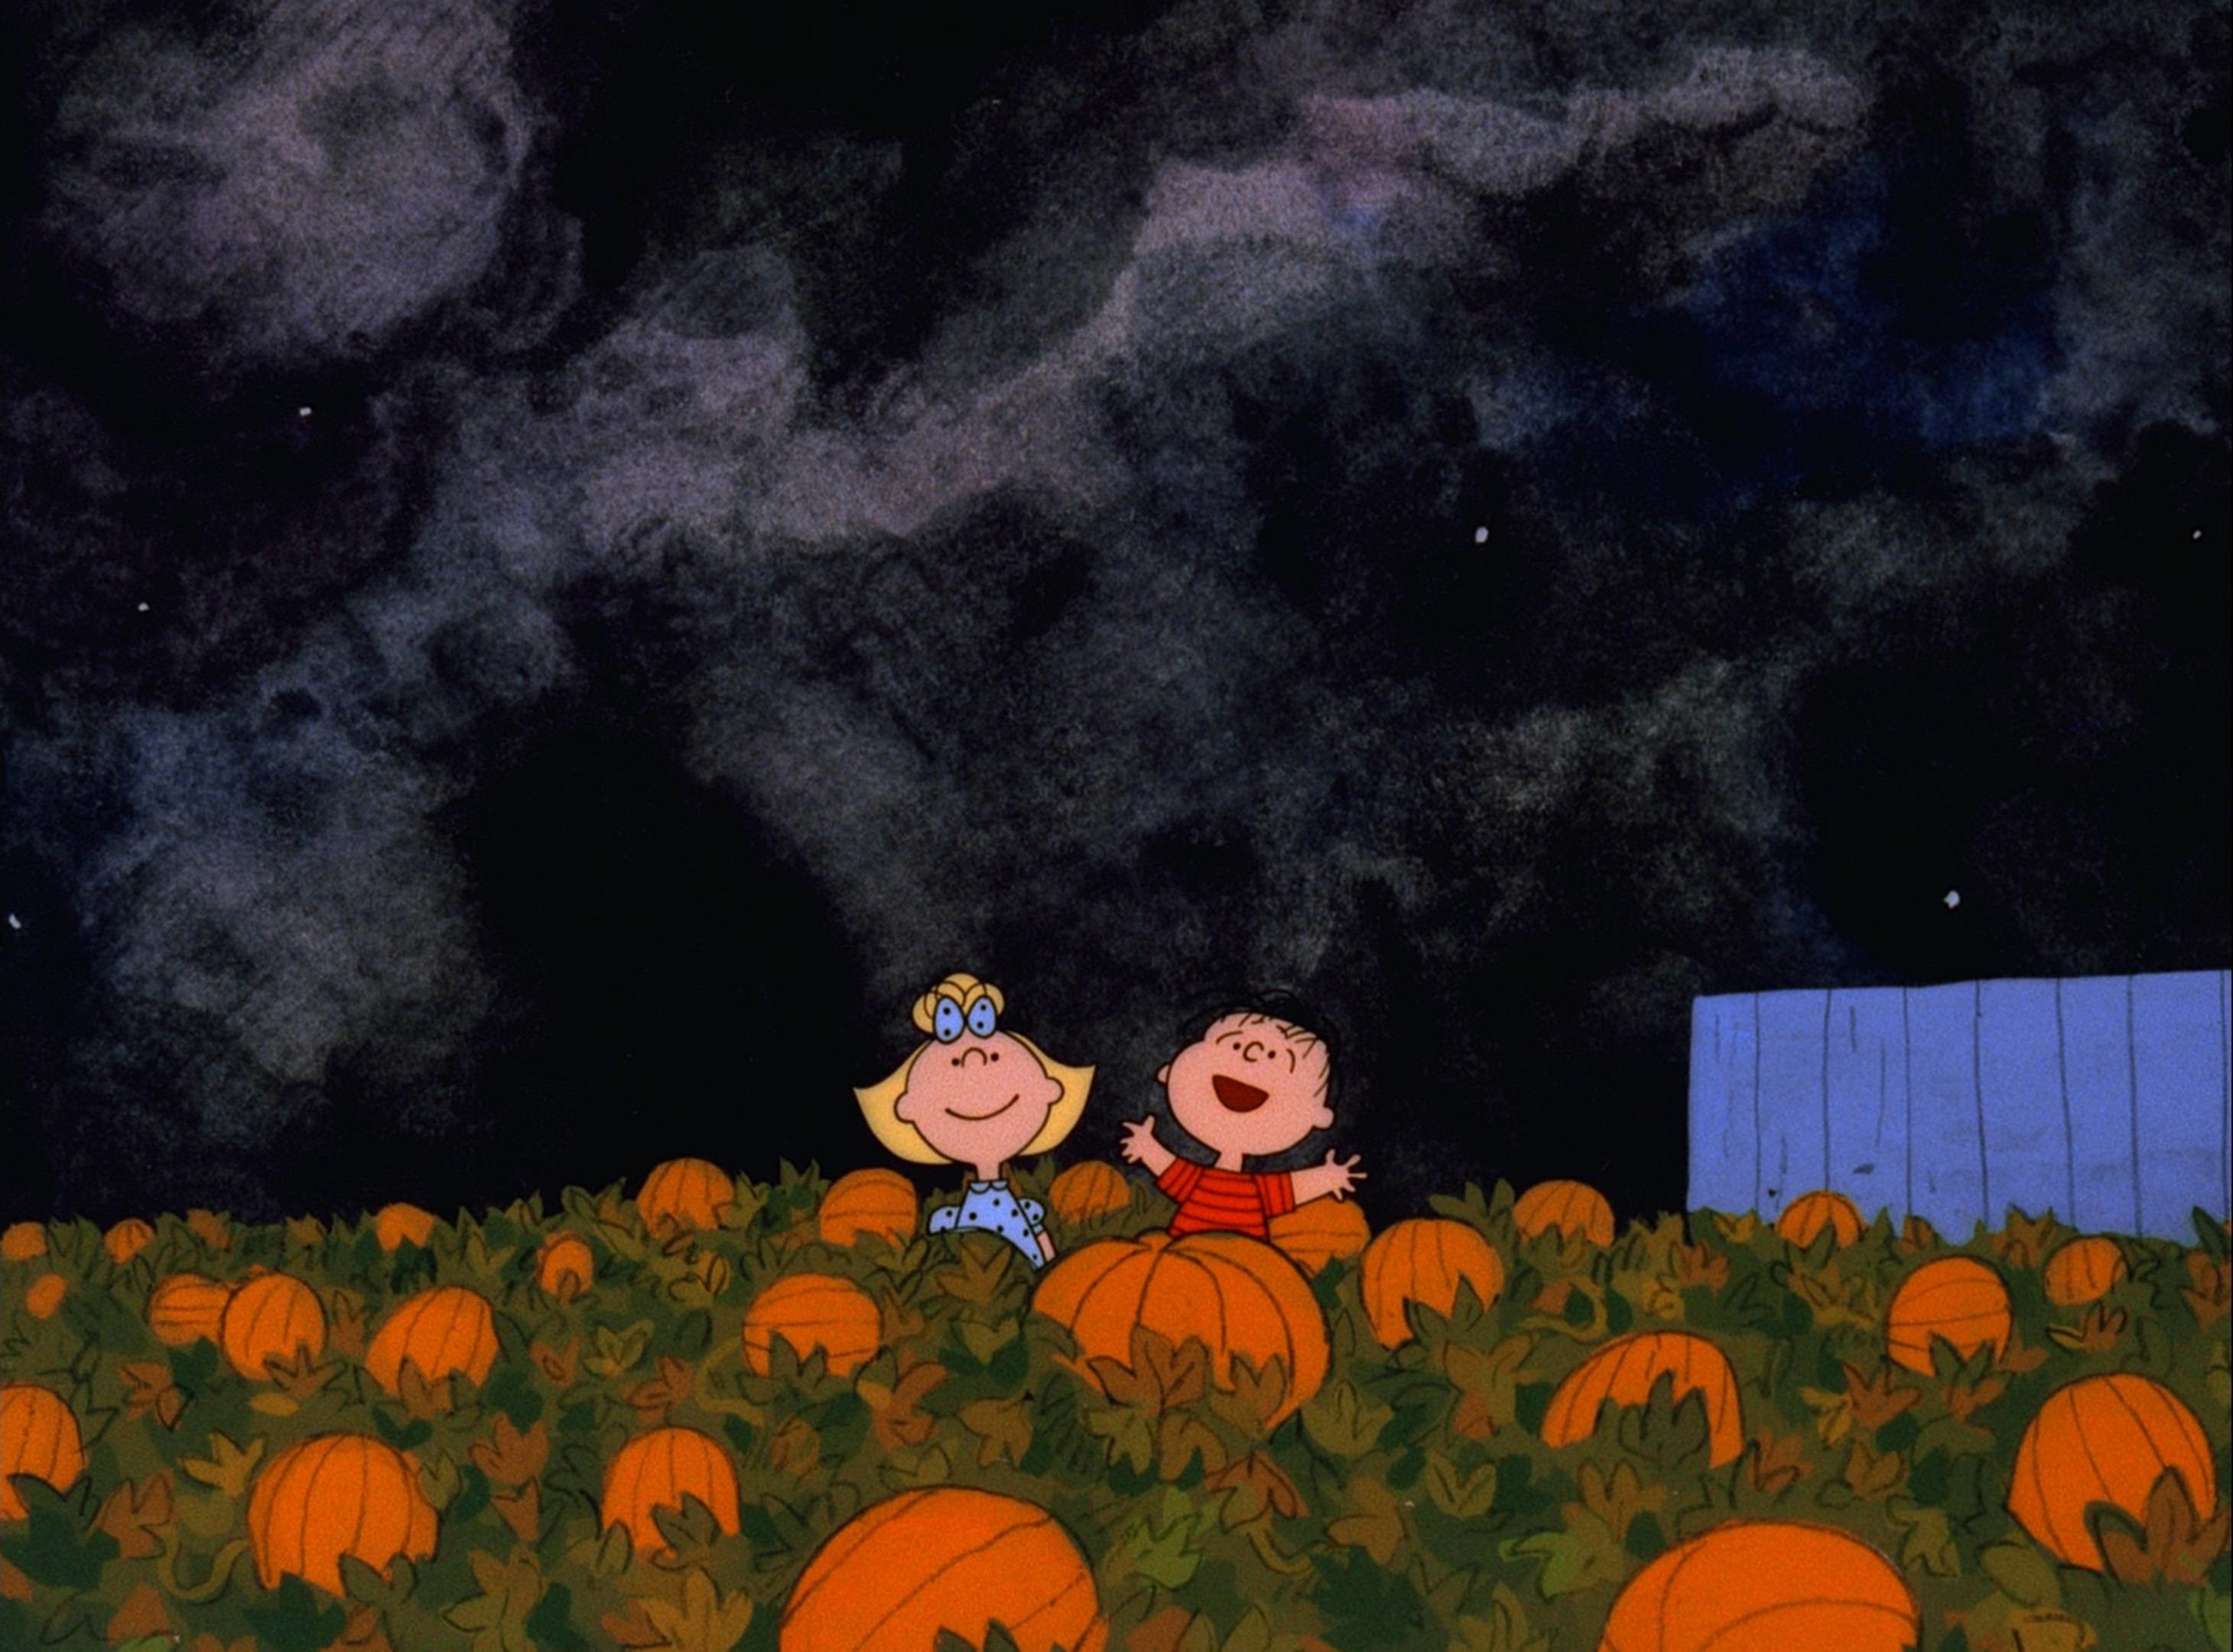 2920x2160 It's the Great Pumpkin, Charlie Brown HD Wallpaper | Background Image |   | ID:876923 - Wallpaper Abyss